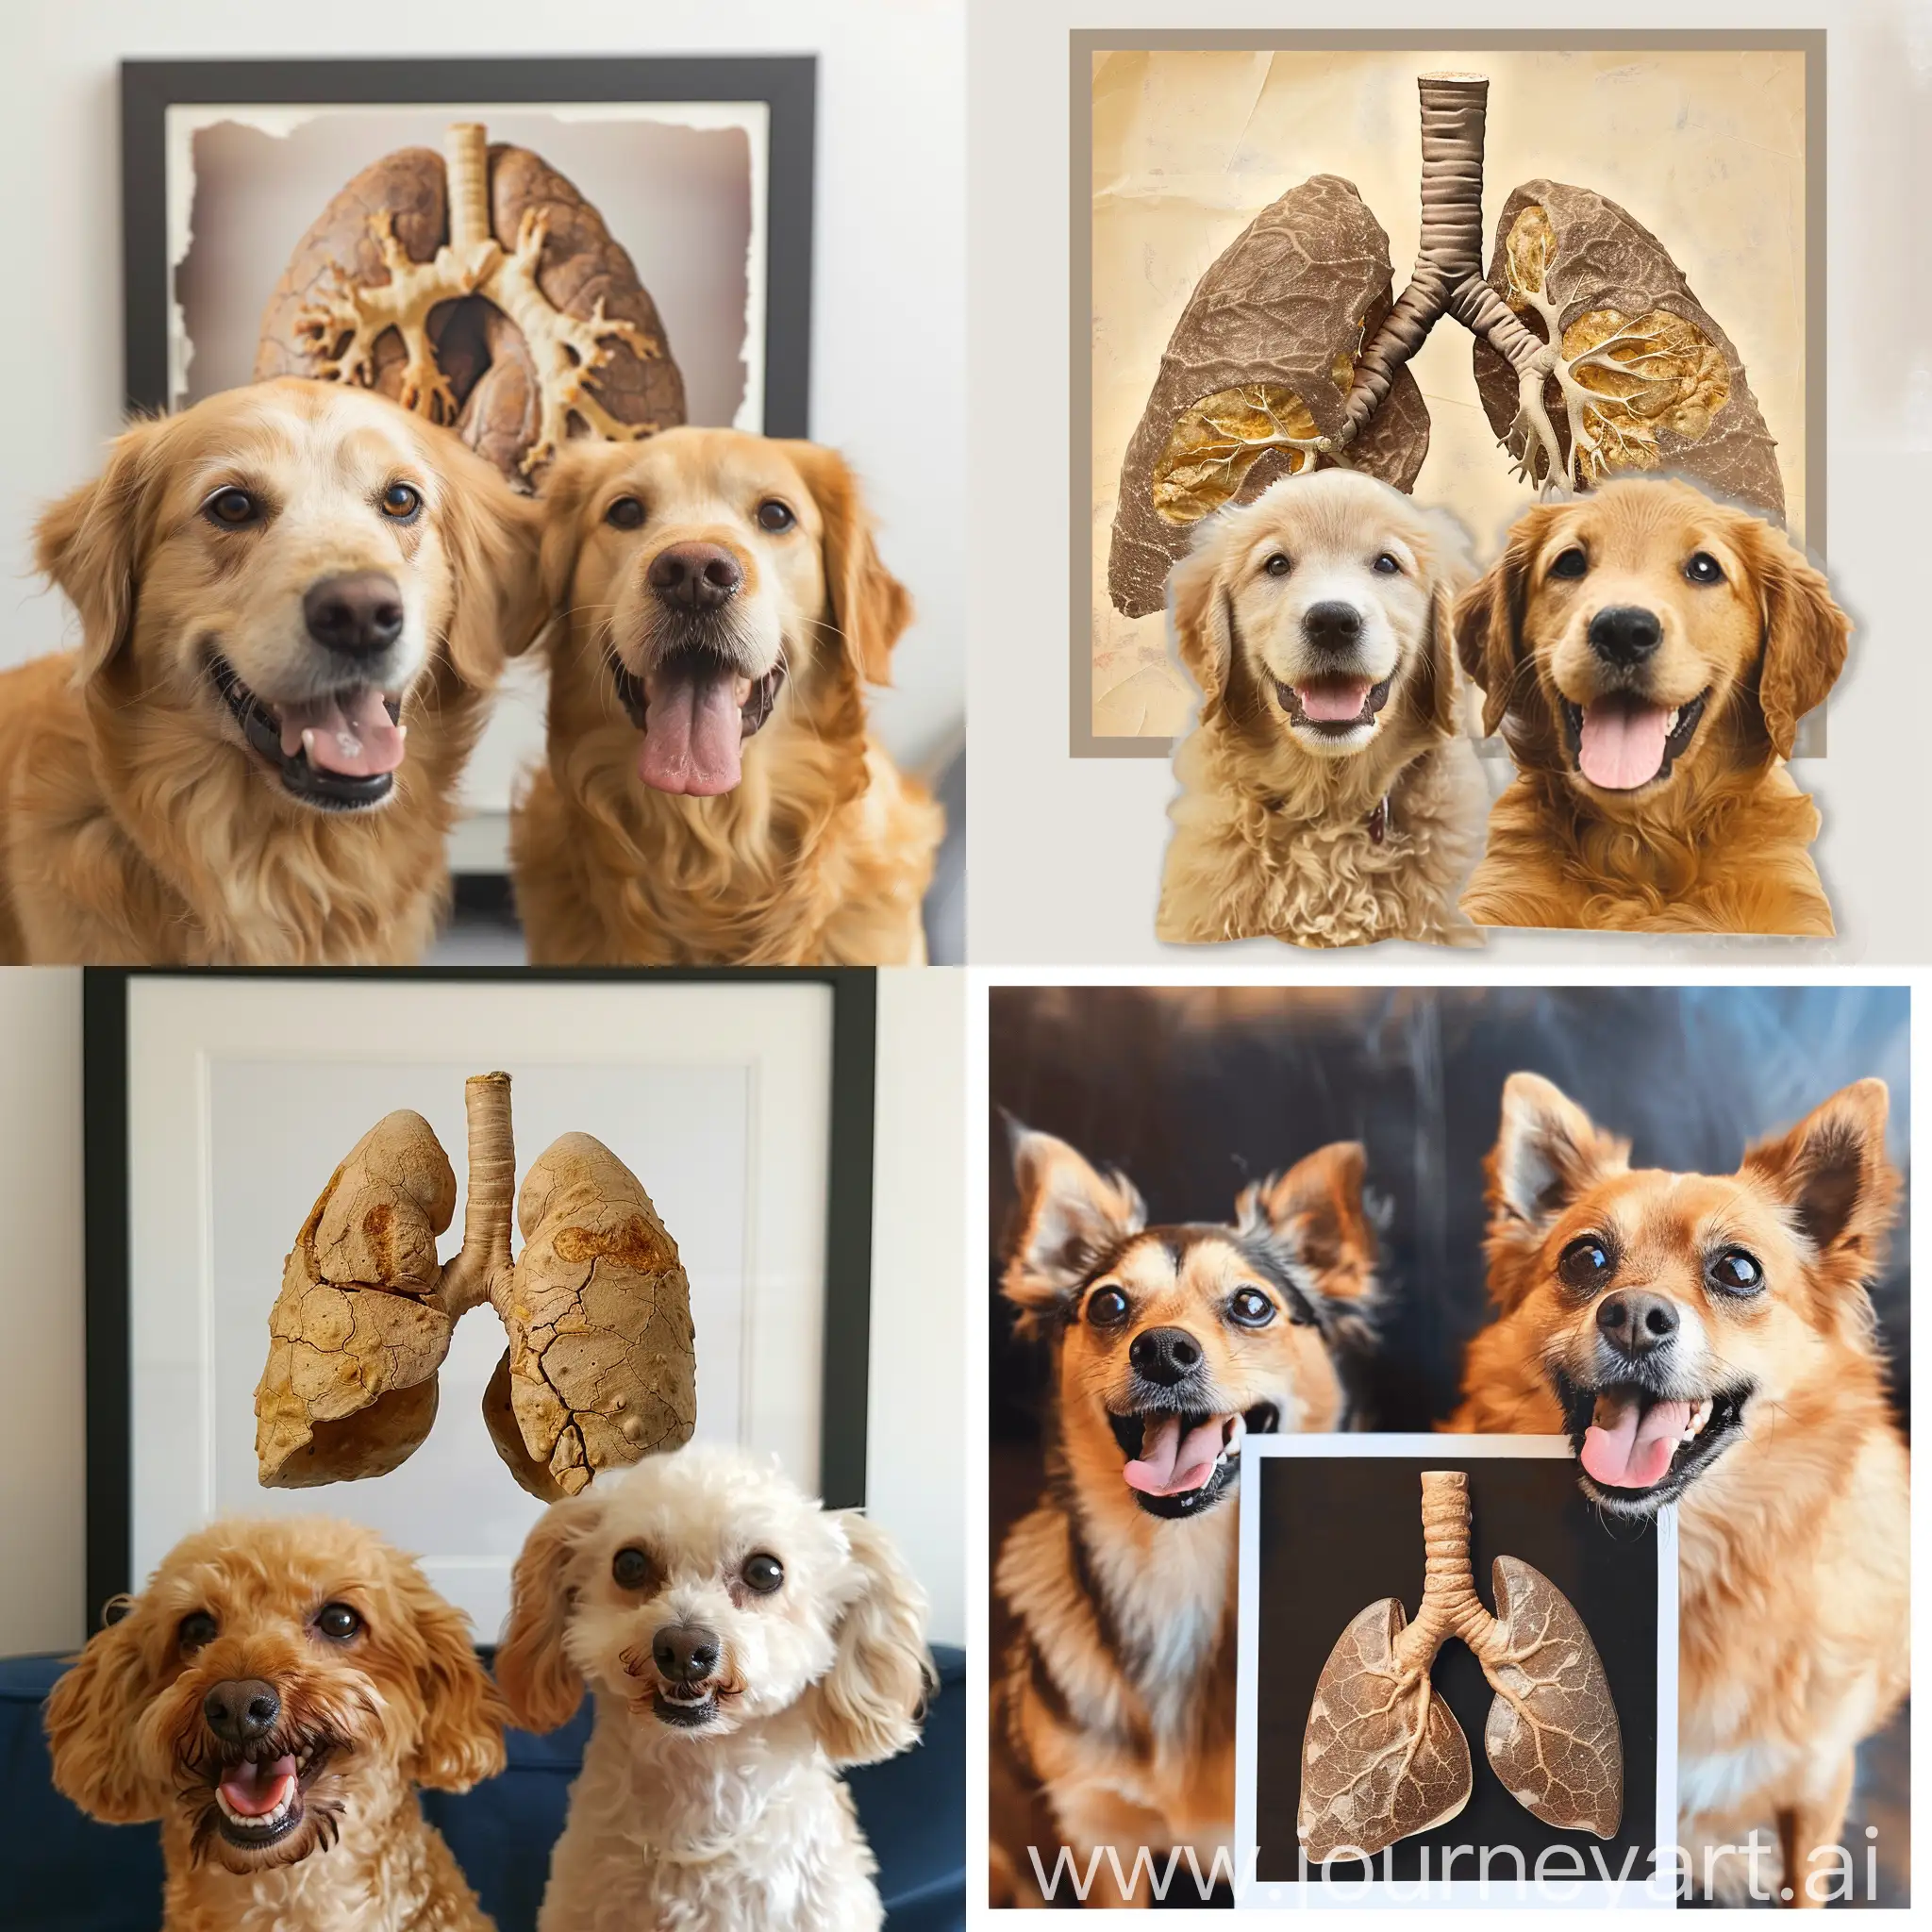 Joyful-Canine-Companions-with-Dried-Lung-Background